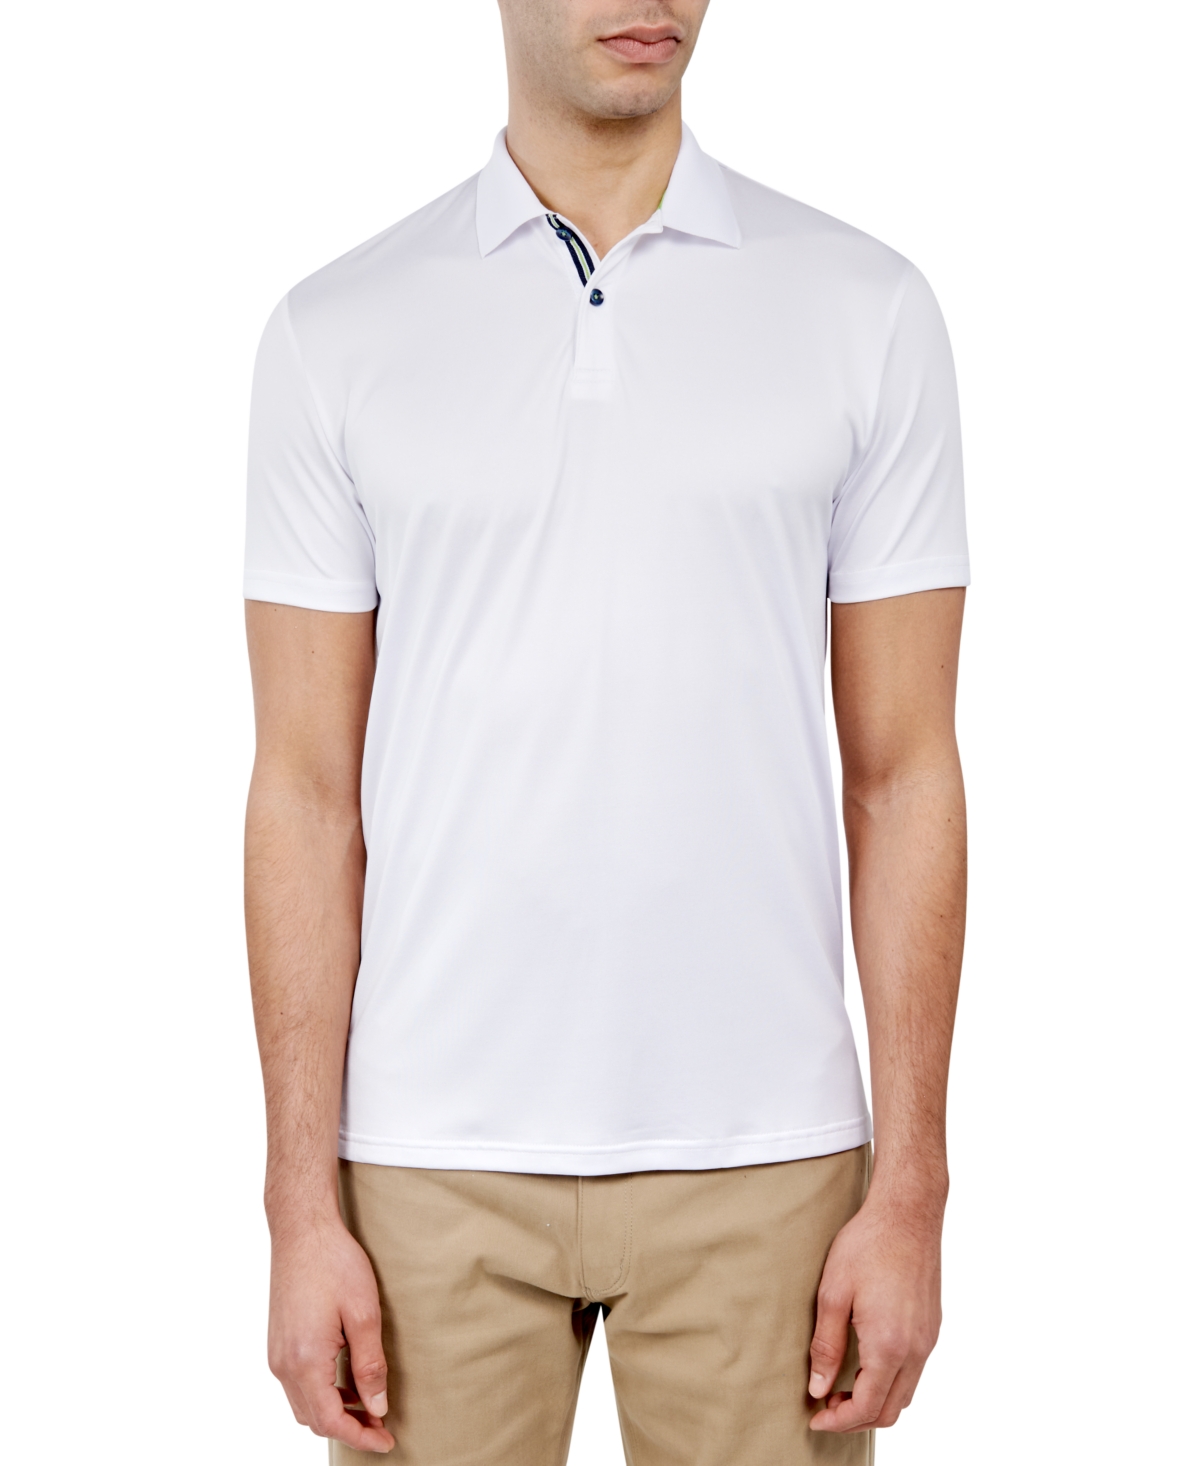 Men's Regular Fit Solid Performance Polo Shirt - White